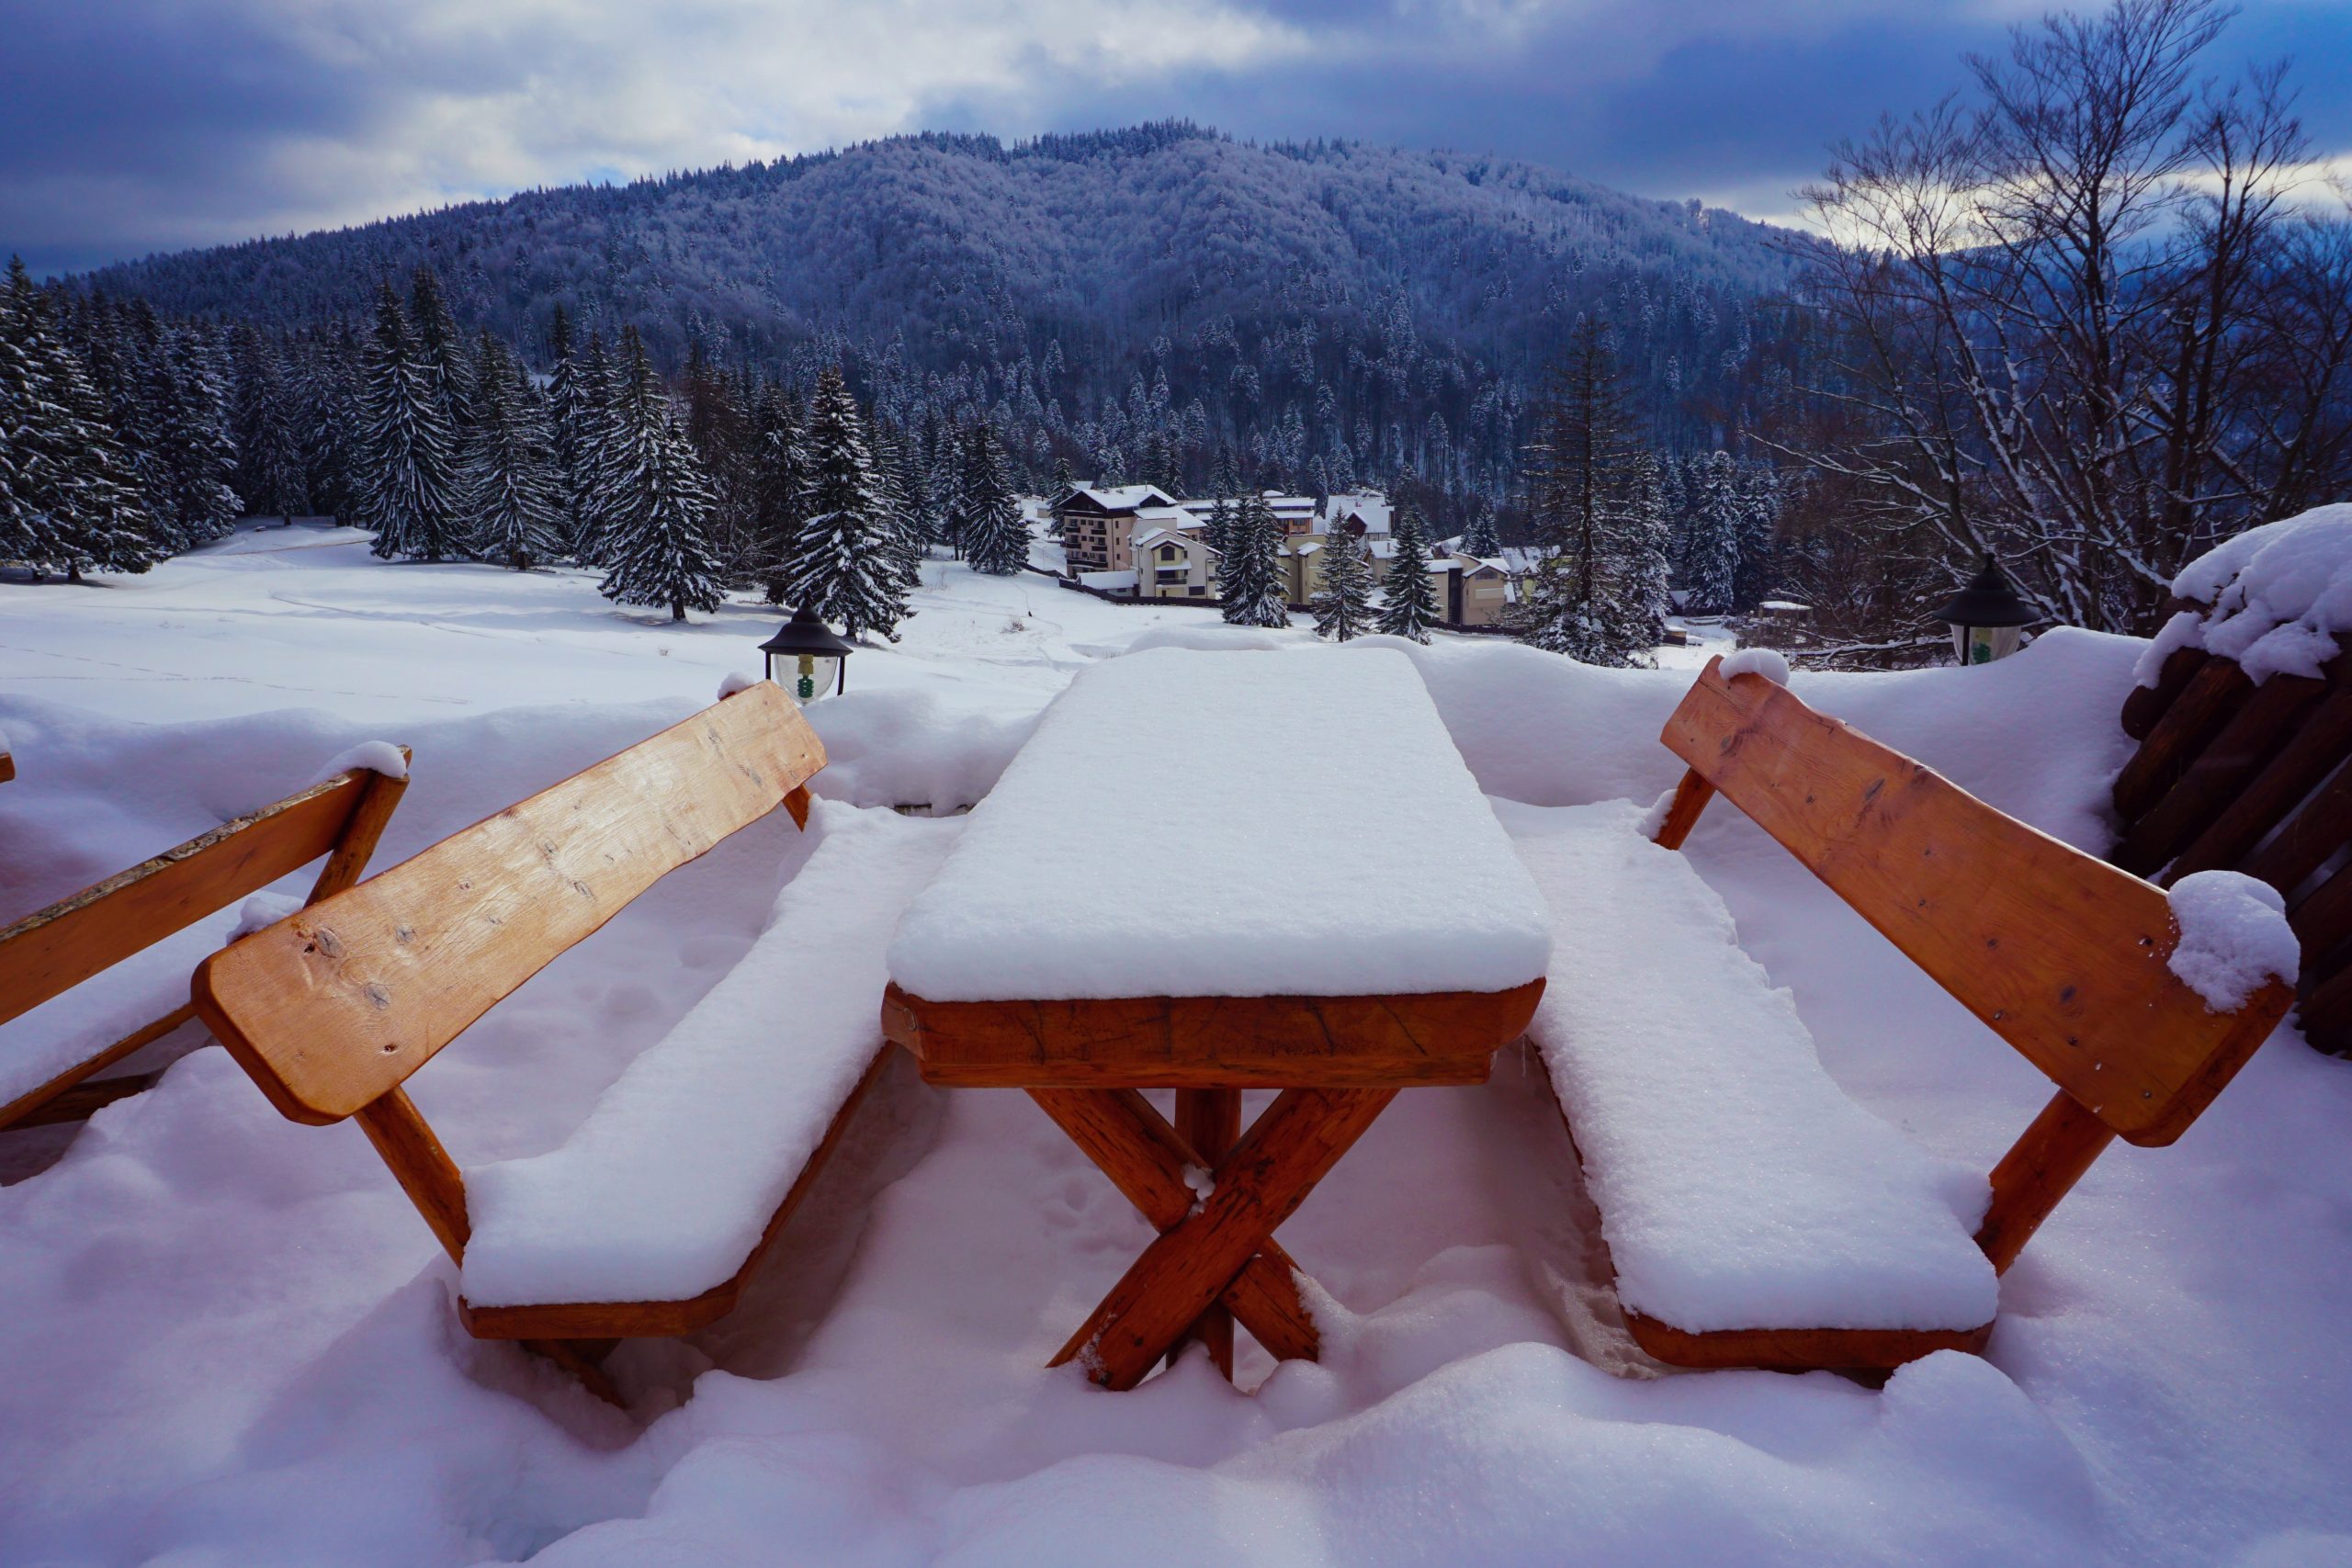 Snow on a wooden rustic bench overlooking the gorgeous mountain peaks in Poiana Brasov